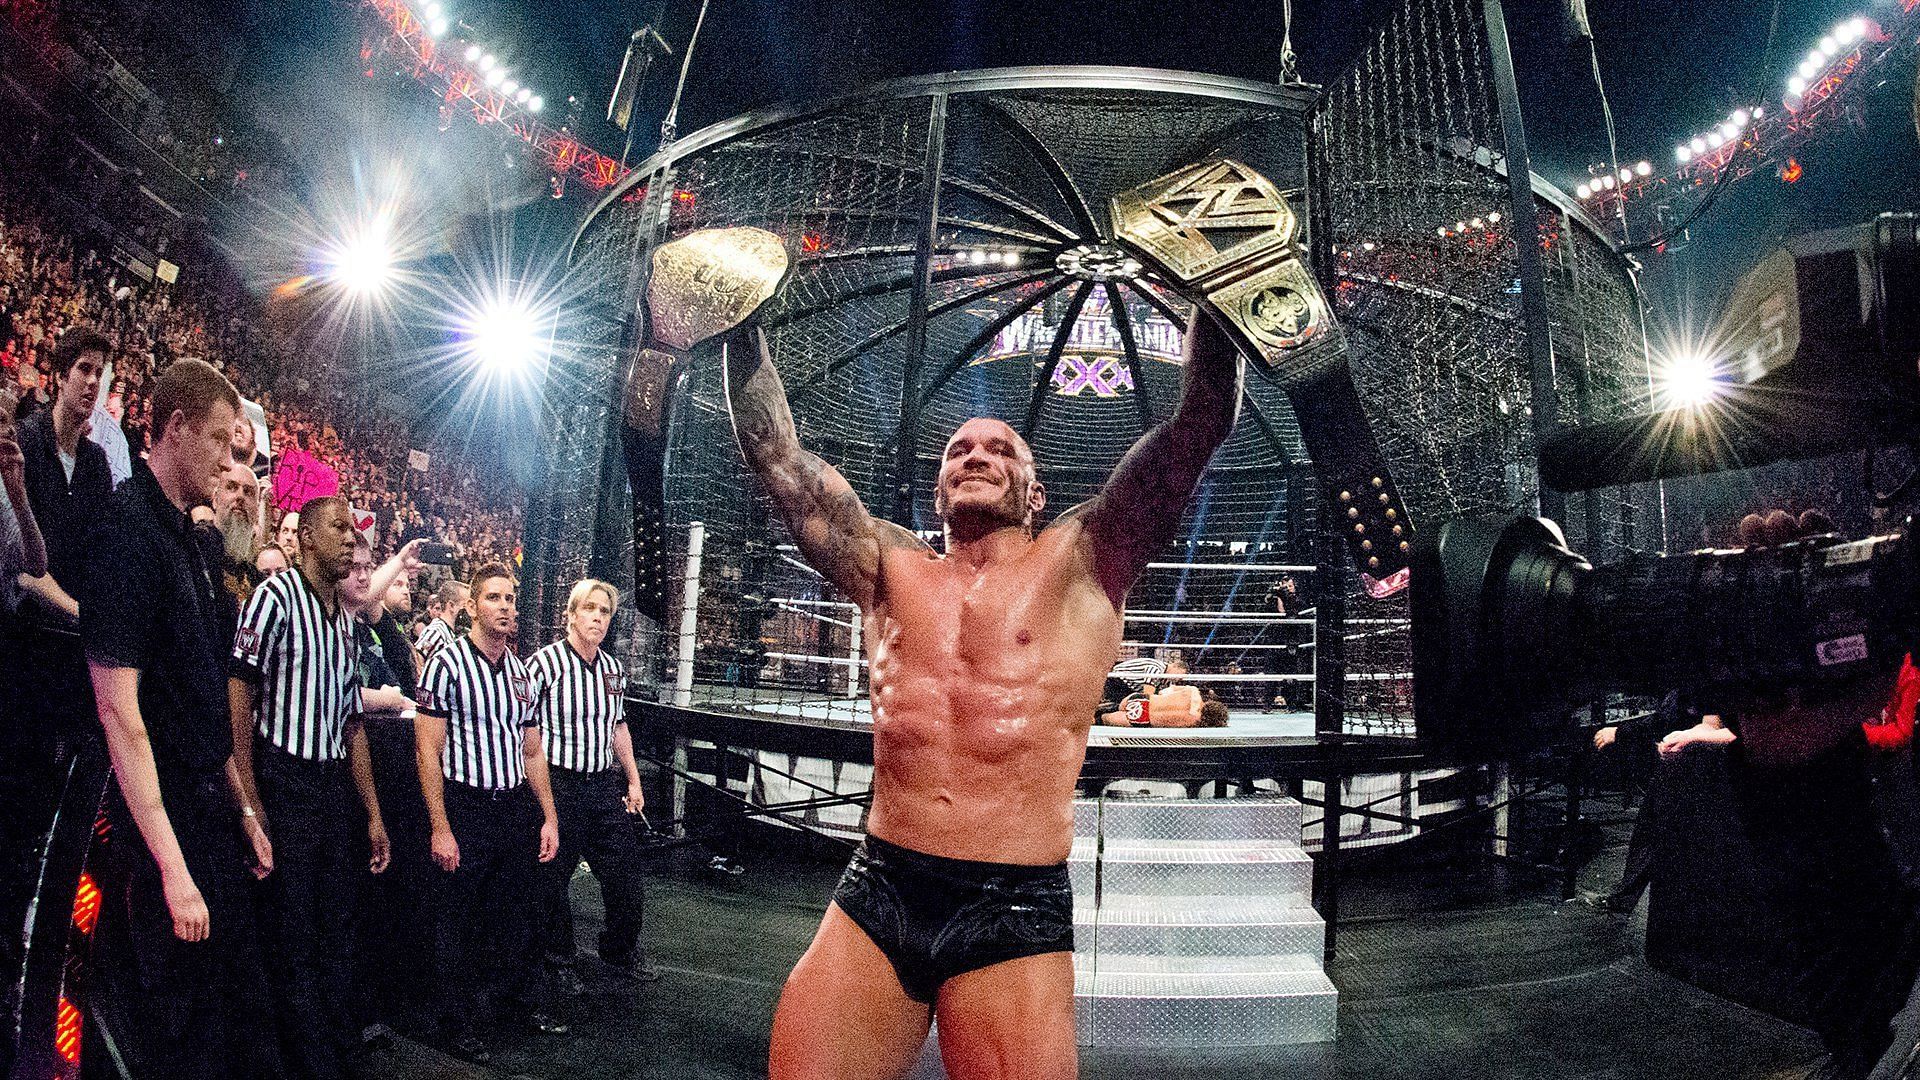 The Viper with the Undisputed titles.